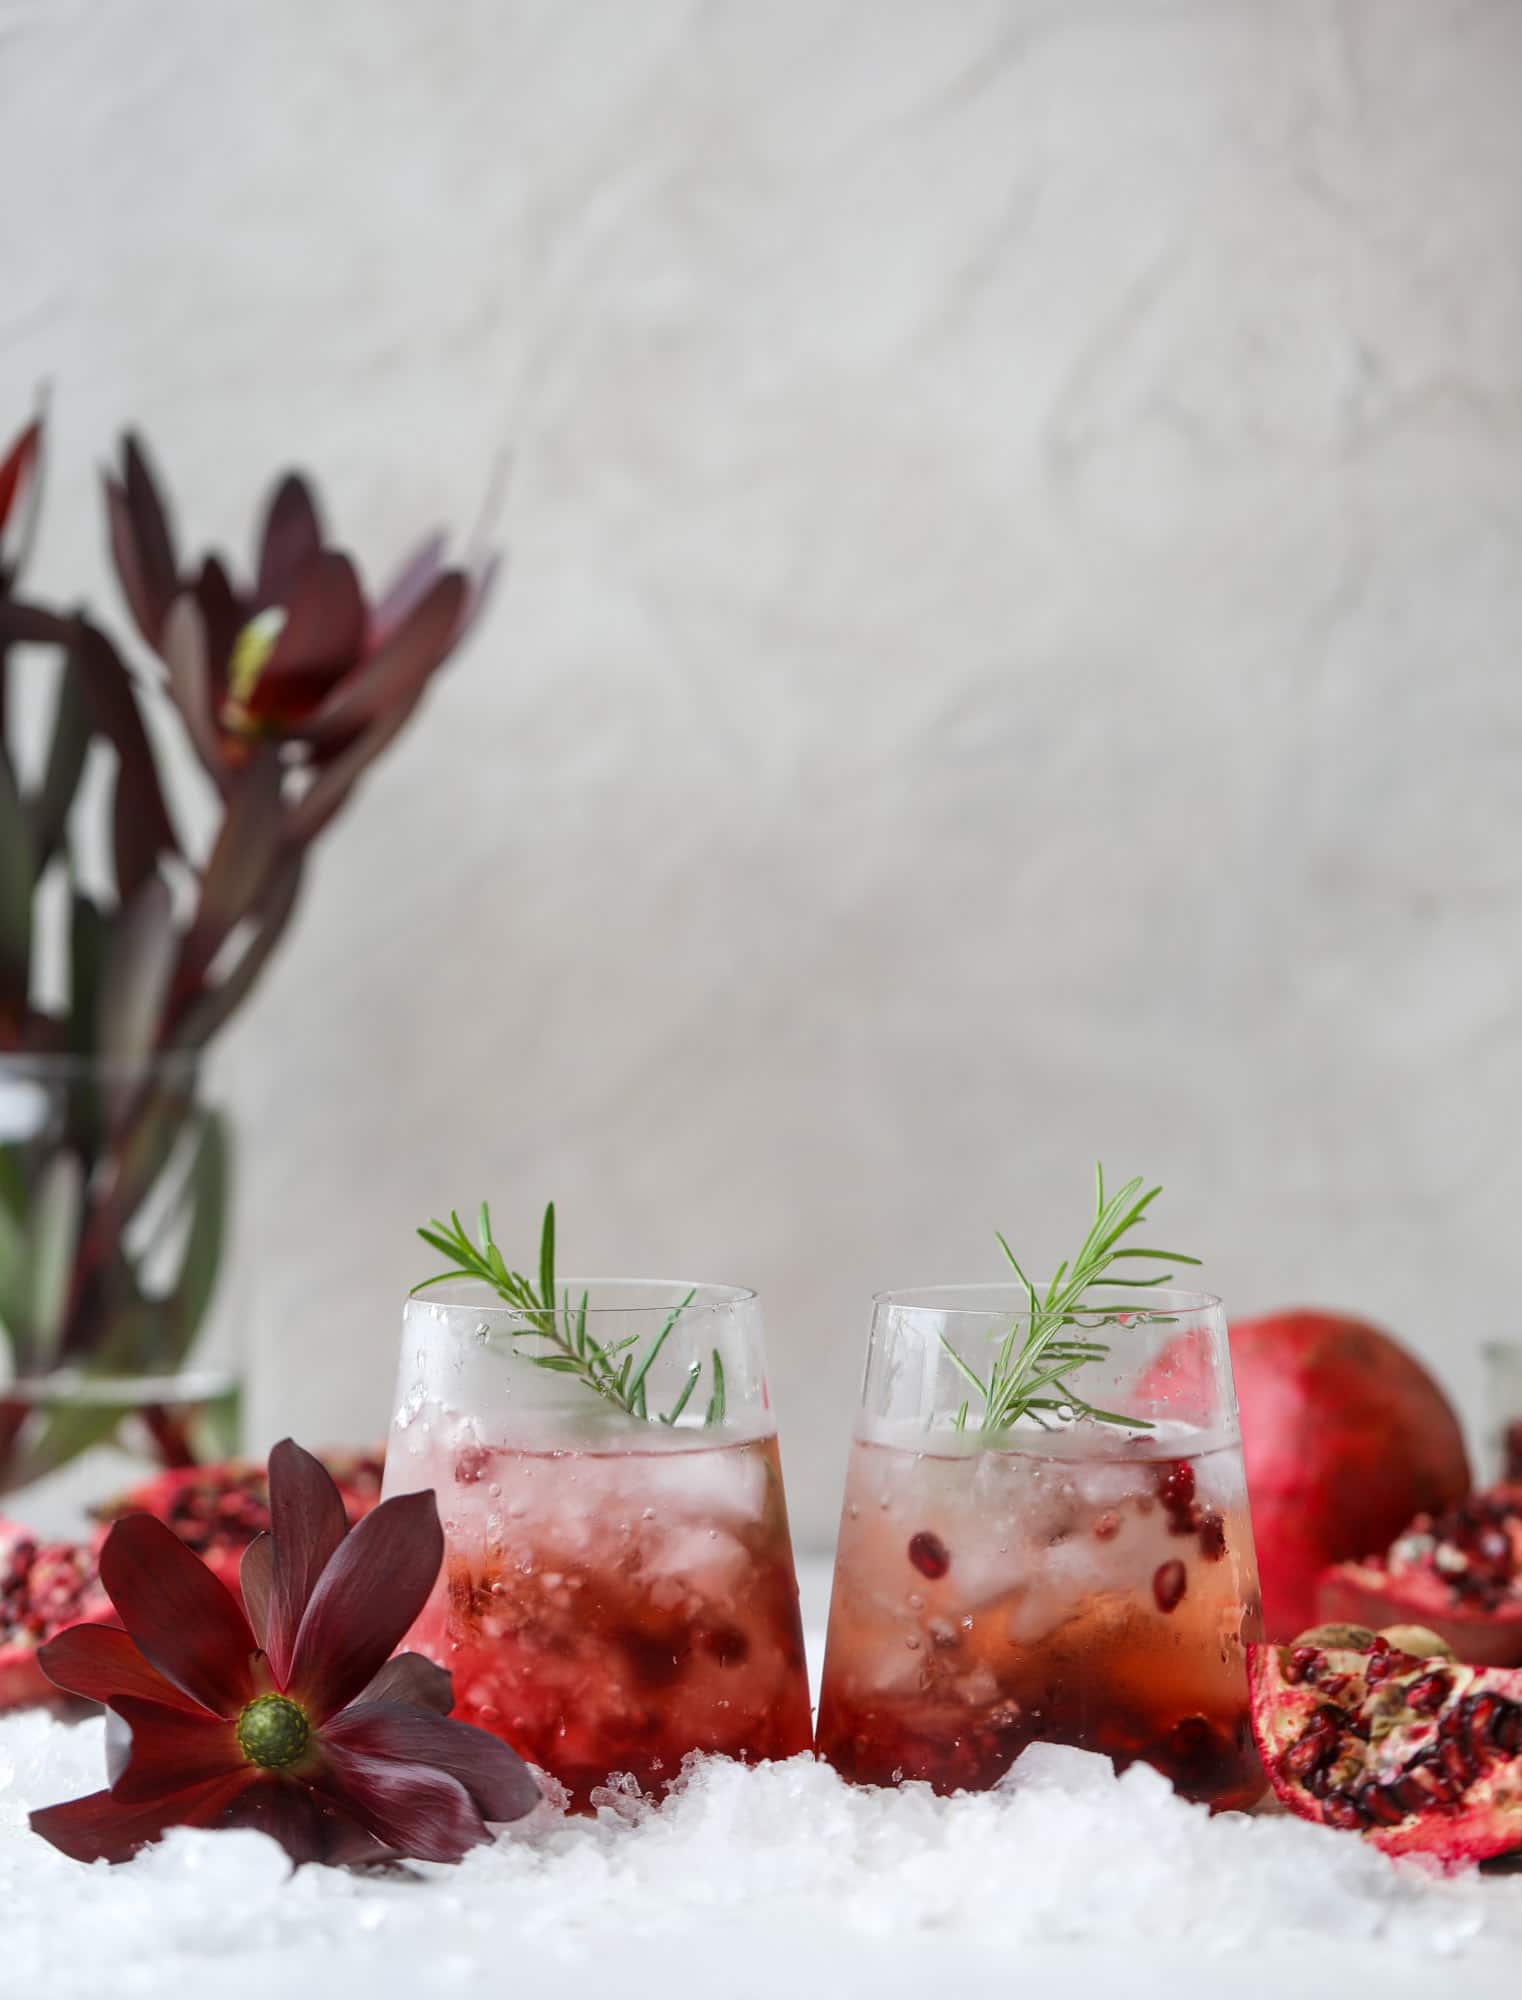 The pomegranate smash cocktail is a great drink for fall, Thanksgiving and the holiday season. Pomegranate juice, vodka and prosecco create a bubbly delicious drink that is garnished with pomegranate arils and rosemary. So festive! I howsweeteats.com #pomegranate #smash